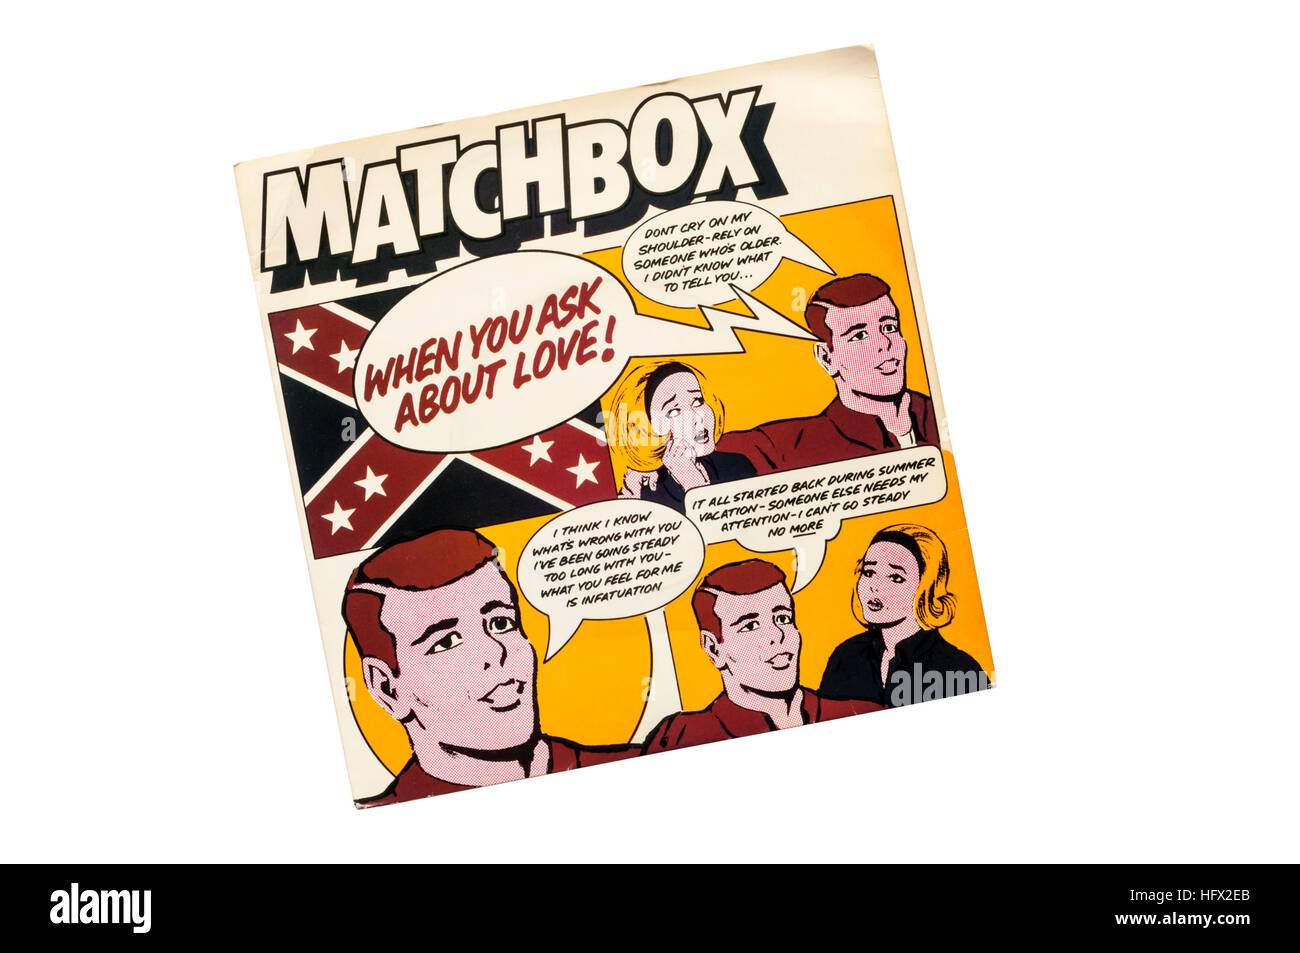 When You Ask About Love! by English rockabilly band Matchbox released in 1980. Stock Photo